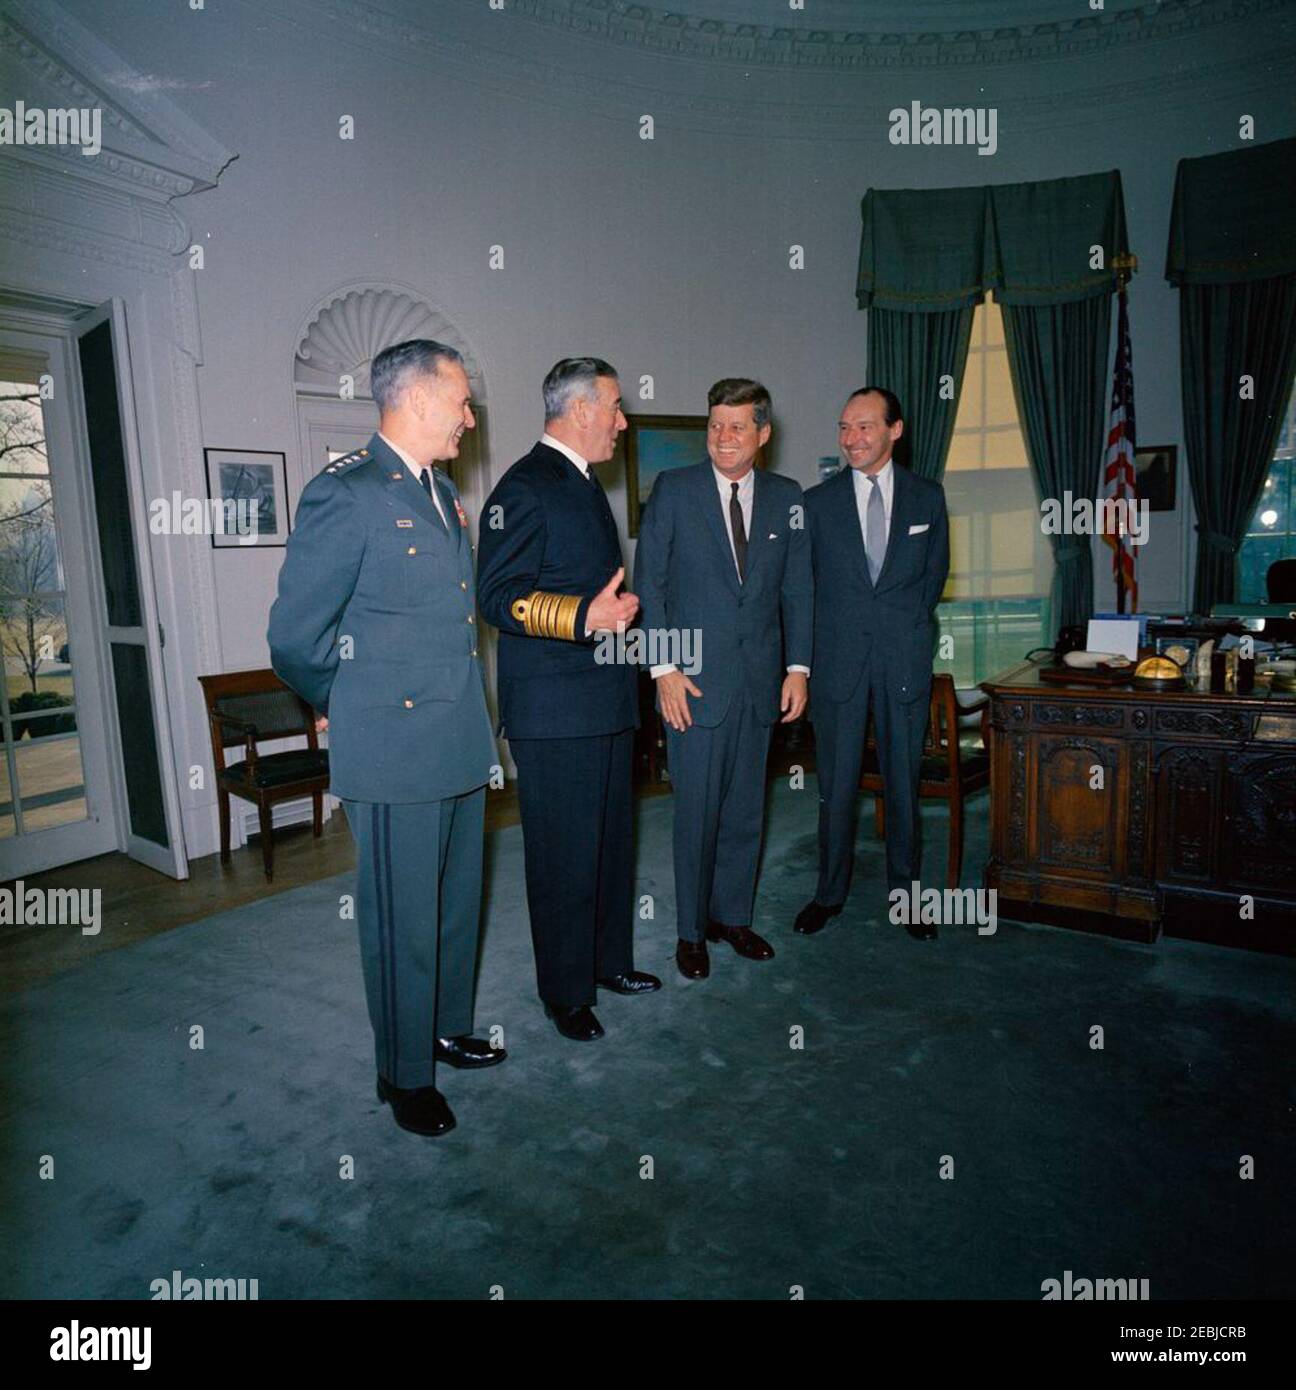 Meeting with The Earl Mountbatten, Chief of the British Defense Staff, 12:05PM. President John F. Kennedy meets with Chief of the Defense Staff of the British Armed Forces and Admiral of the Fleet, Lord Louis Mountbatten, First Earl Mountbatten of Burma. Left to right: Chairman of the Joint Chiefs of Staff, General Maxwell D. Taylor; Lord Mountbatten; President Kennedy; Ambassador of Great Britain, Sir David Ormsby-Gore. Oval Office, White House, Washington, D.C. Stock Photo